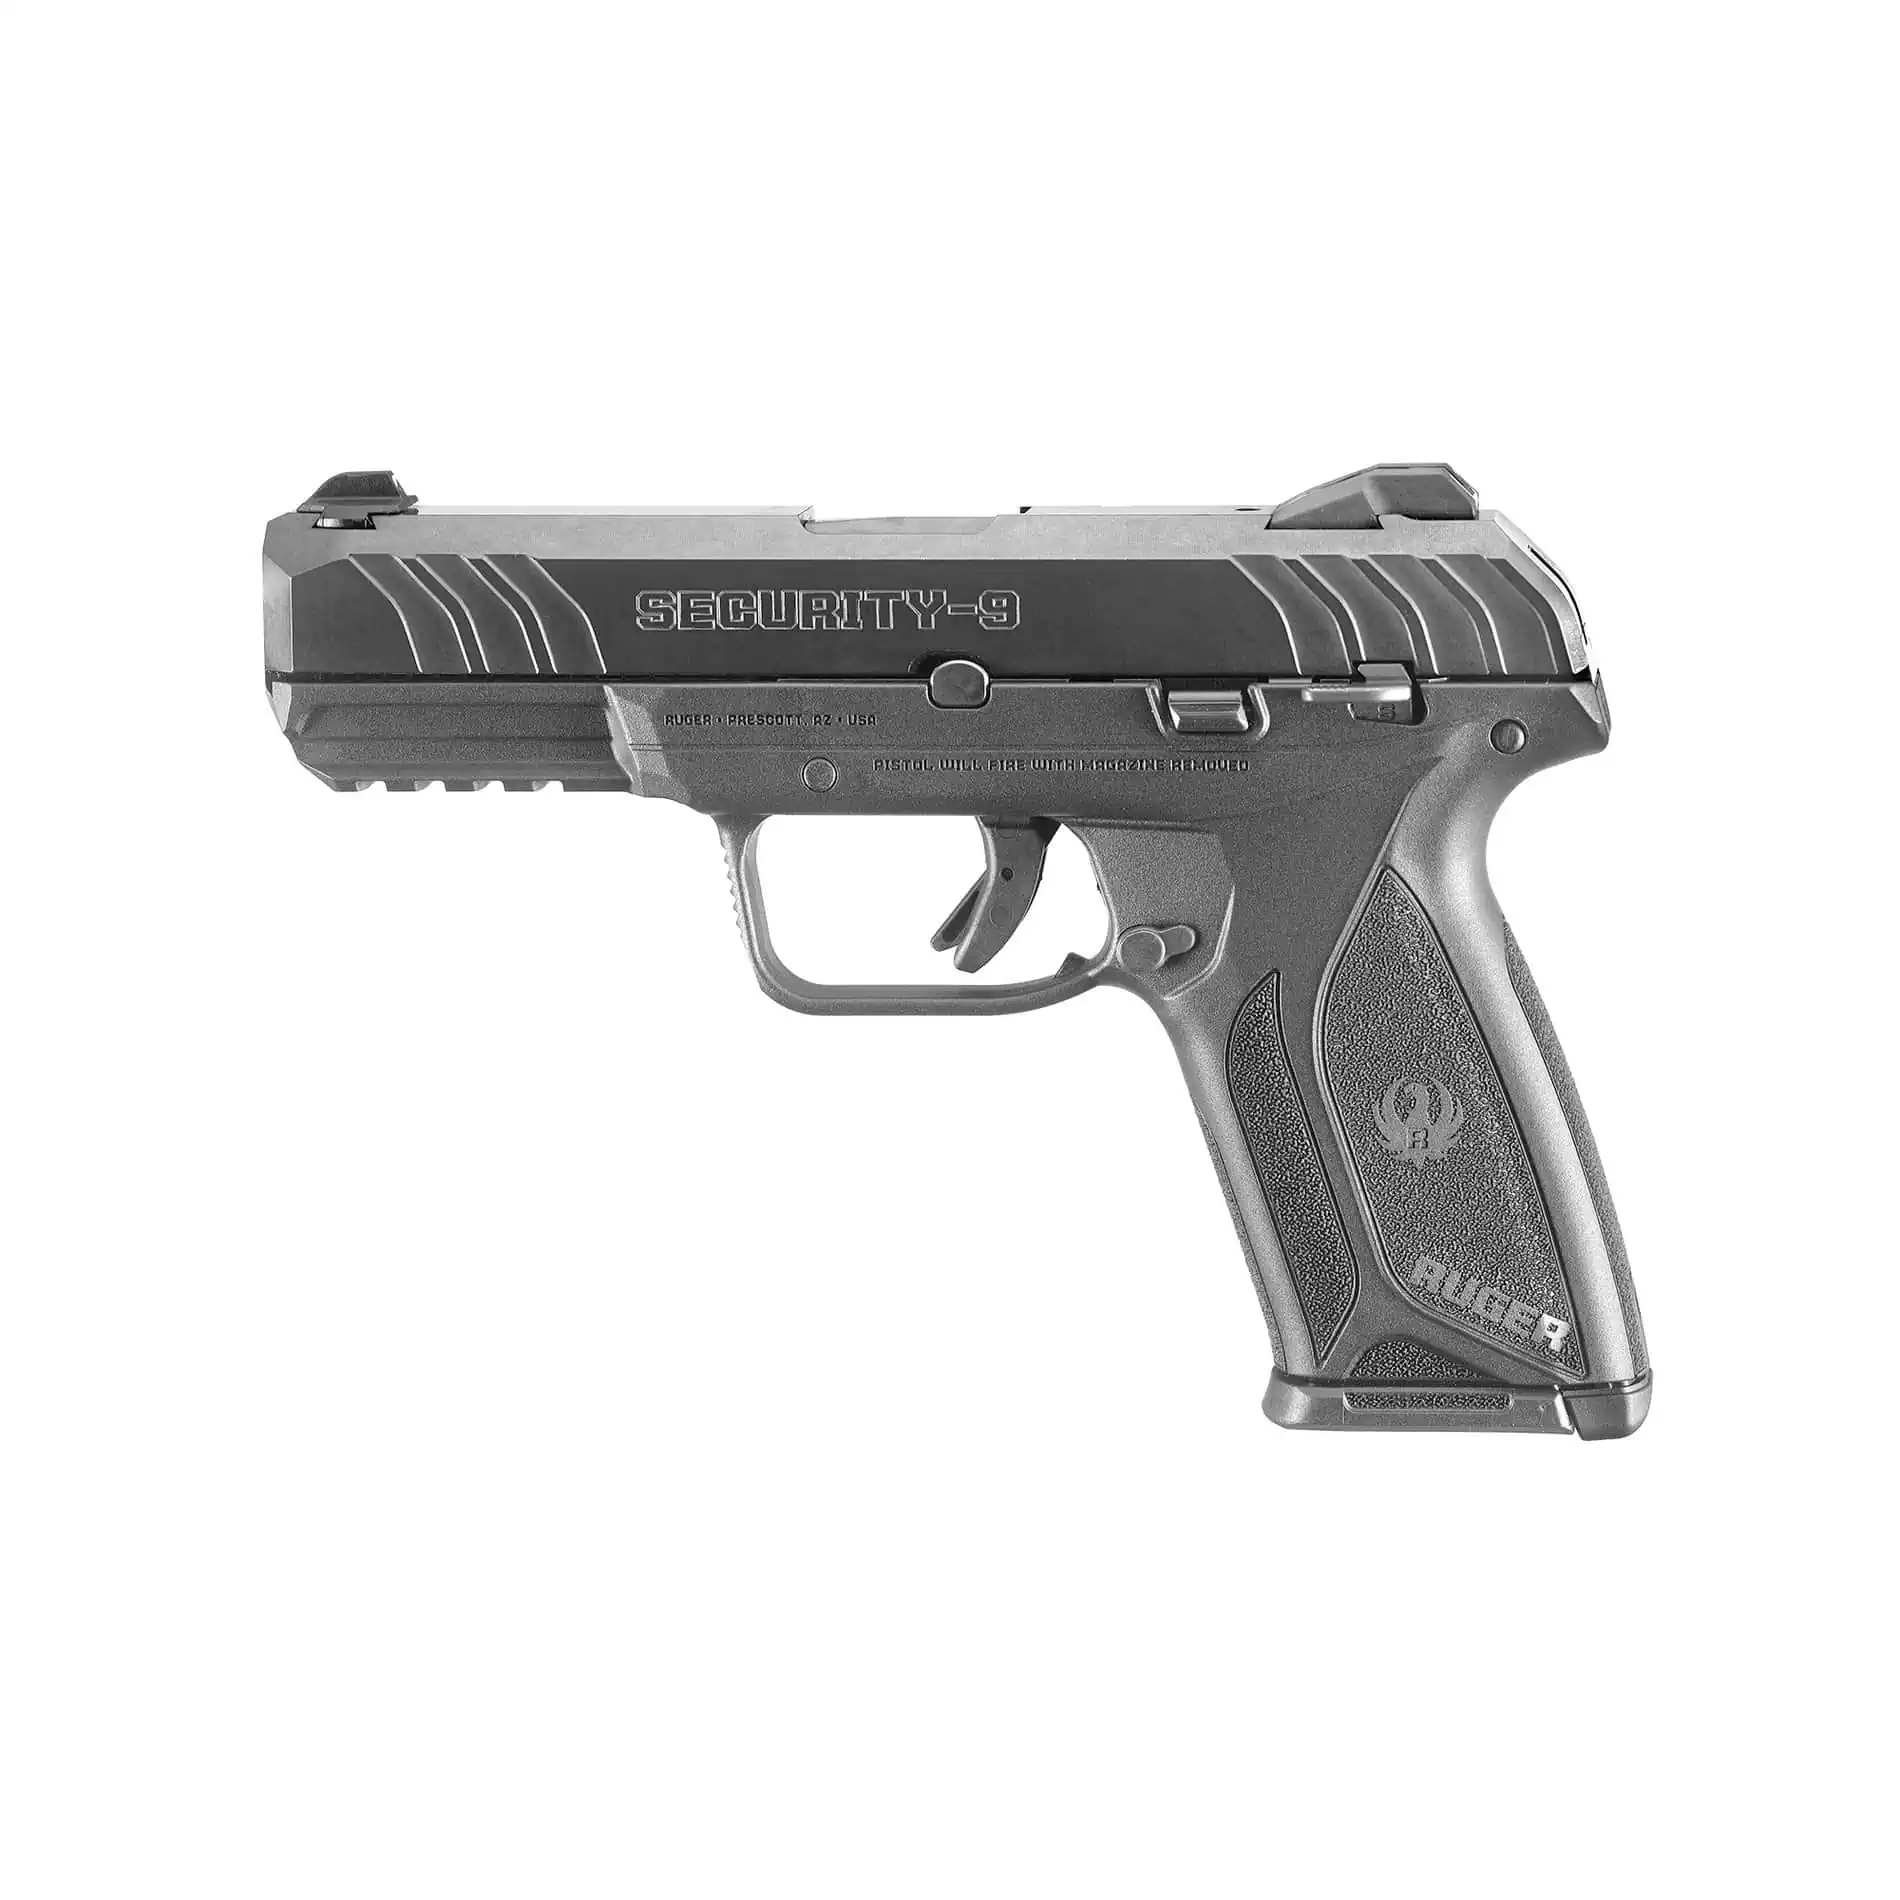 Ruger Security-9 9mm 4" Pistol - 15 Rounds - 3 Dot Sights